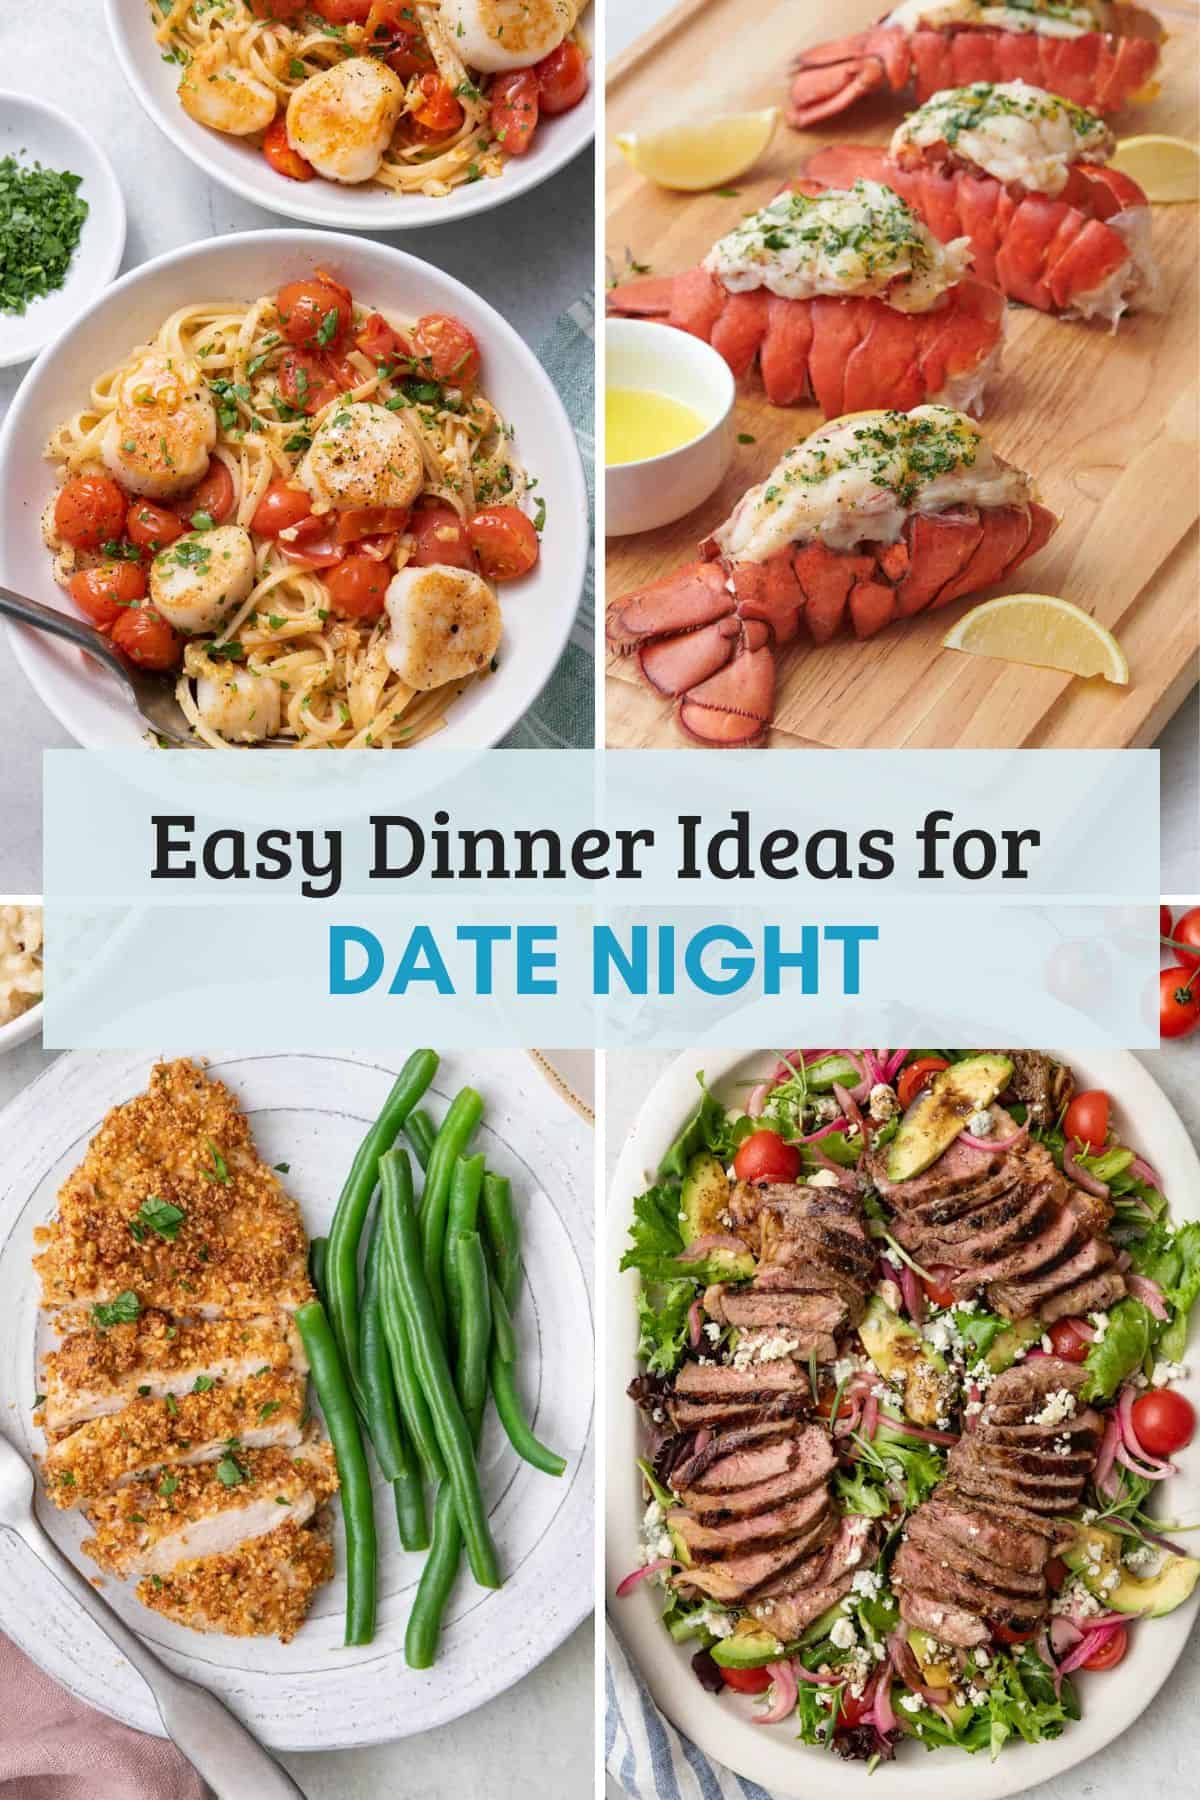 Recipe roundup /collection of date night dinners - valentine's day